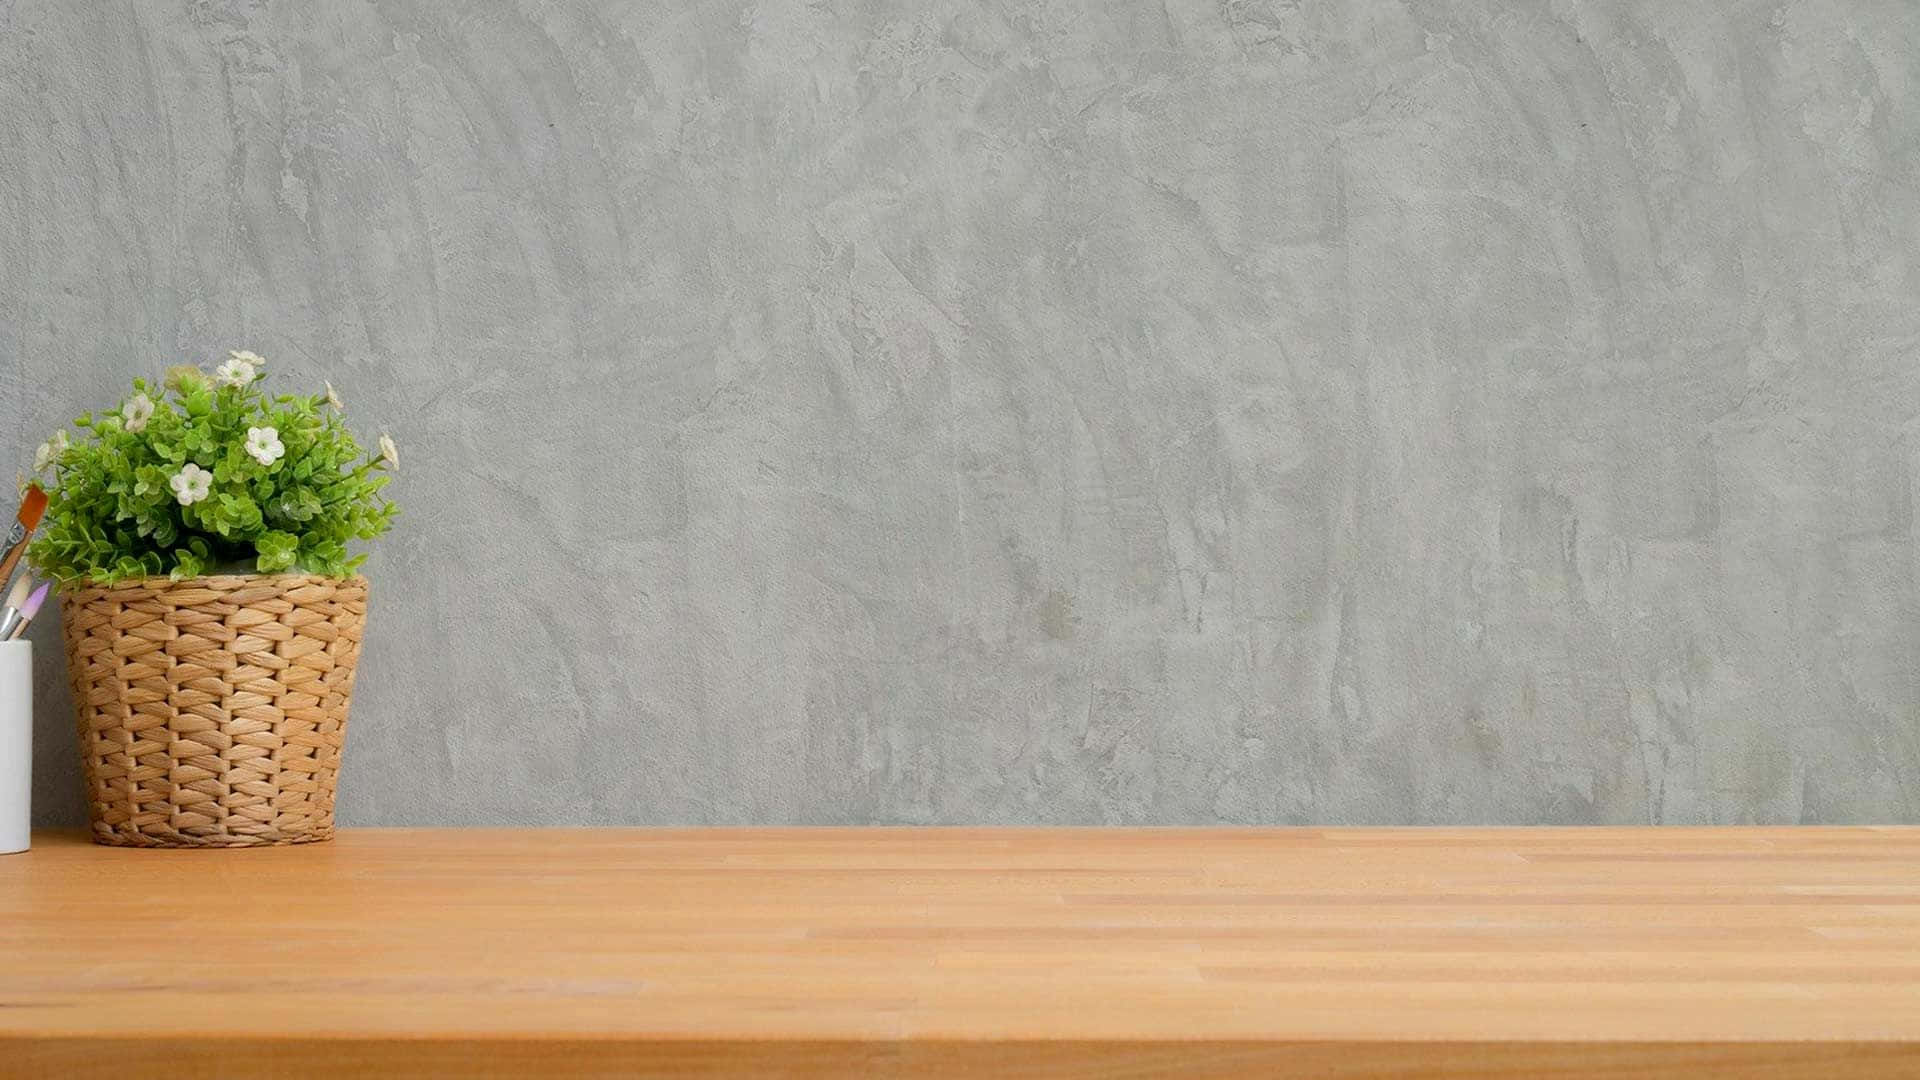 Simple Zoom Background Wooden Table 1920 x 1080